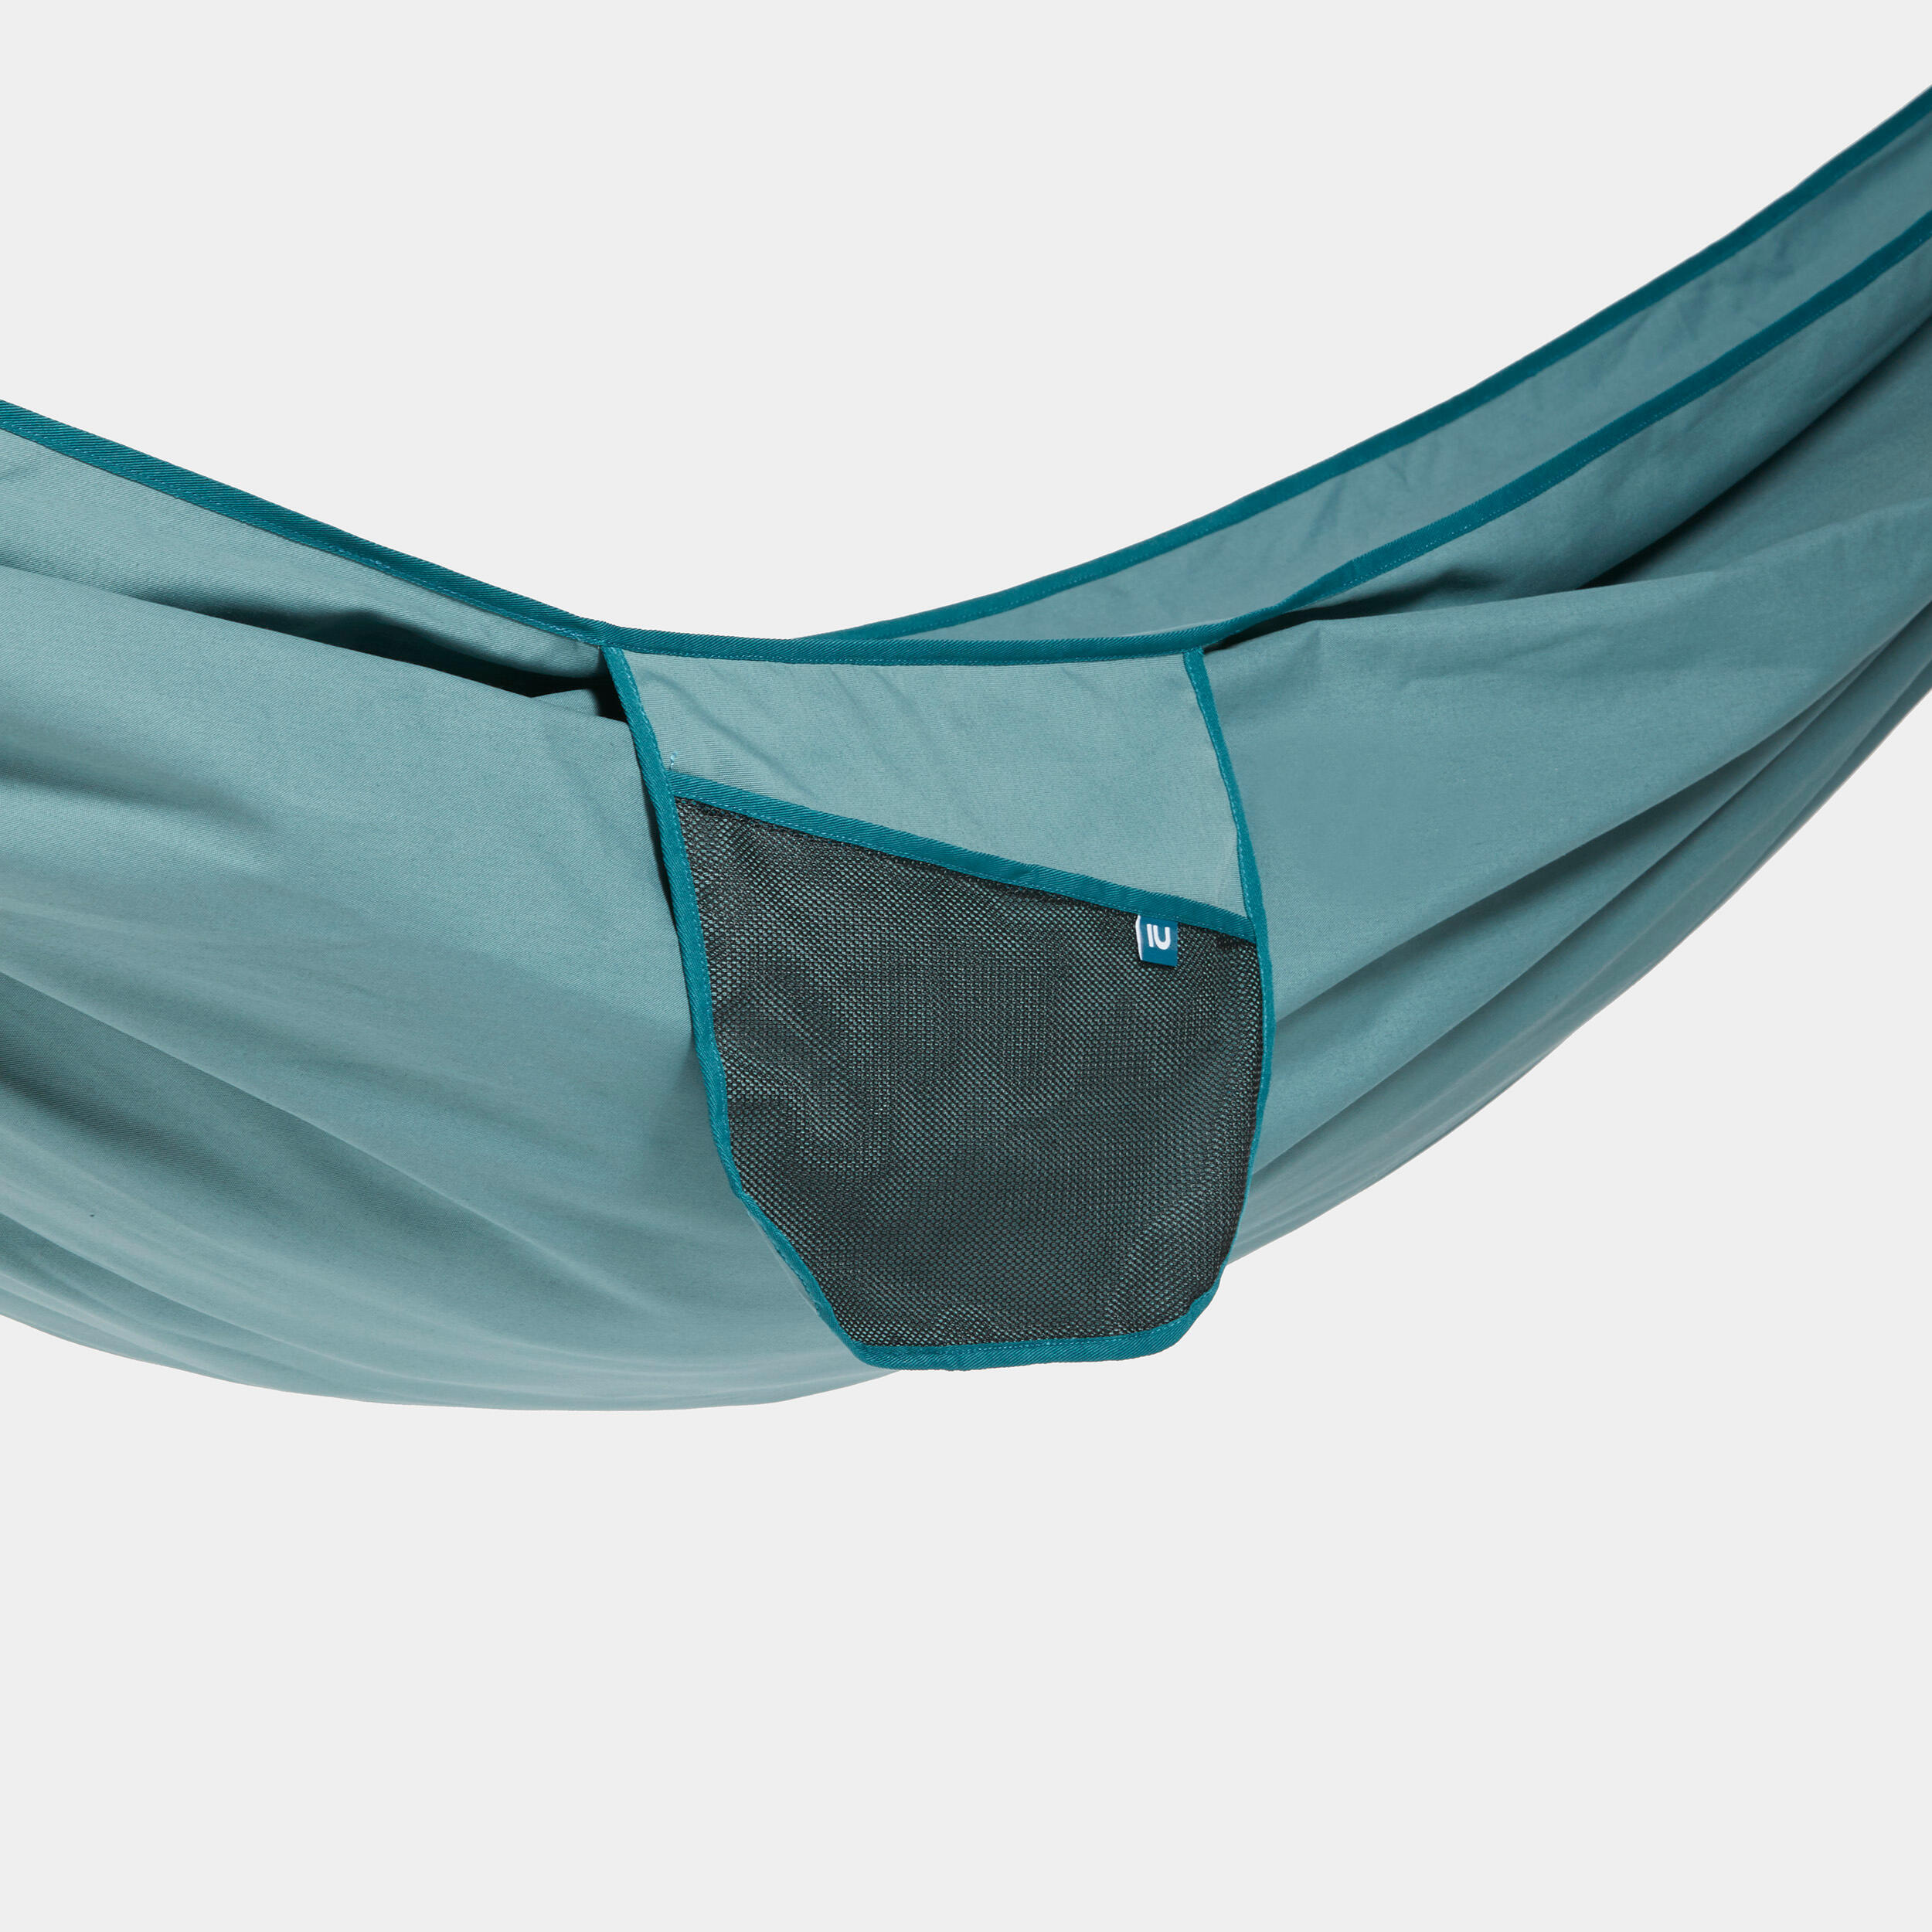 Two-person Polycotton Hammock - Ultim Comfort 350 x 180 cm - 2 Person 4/9